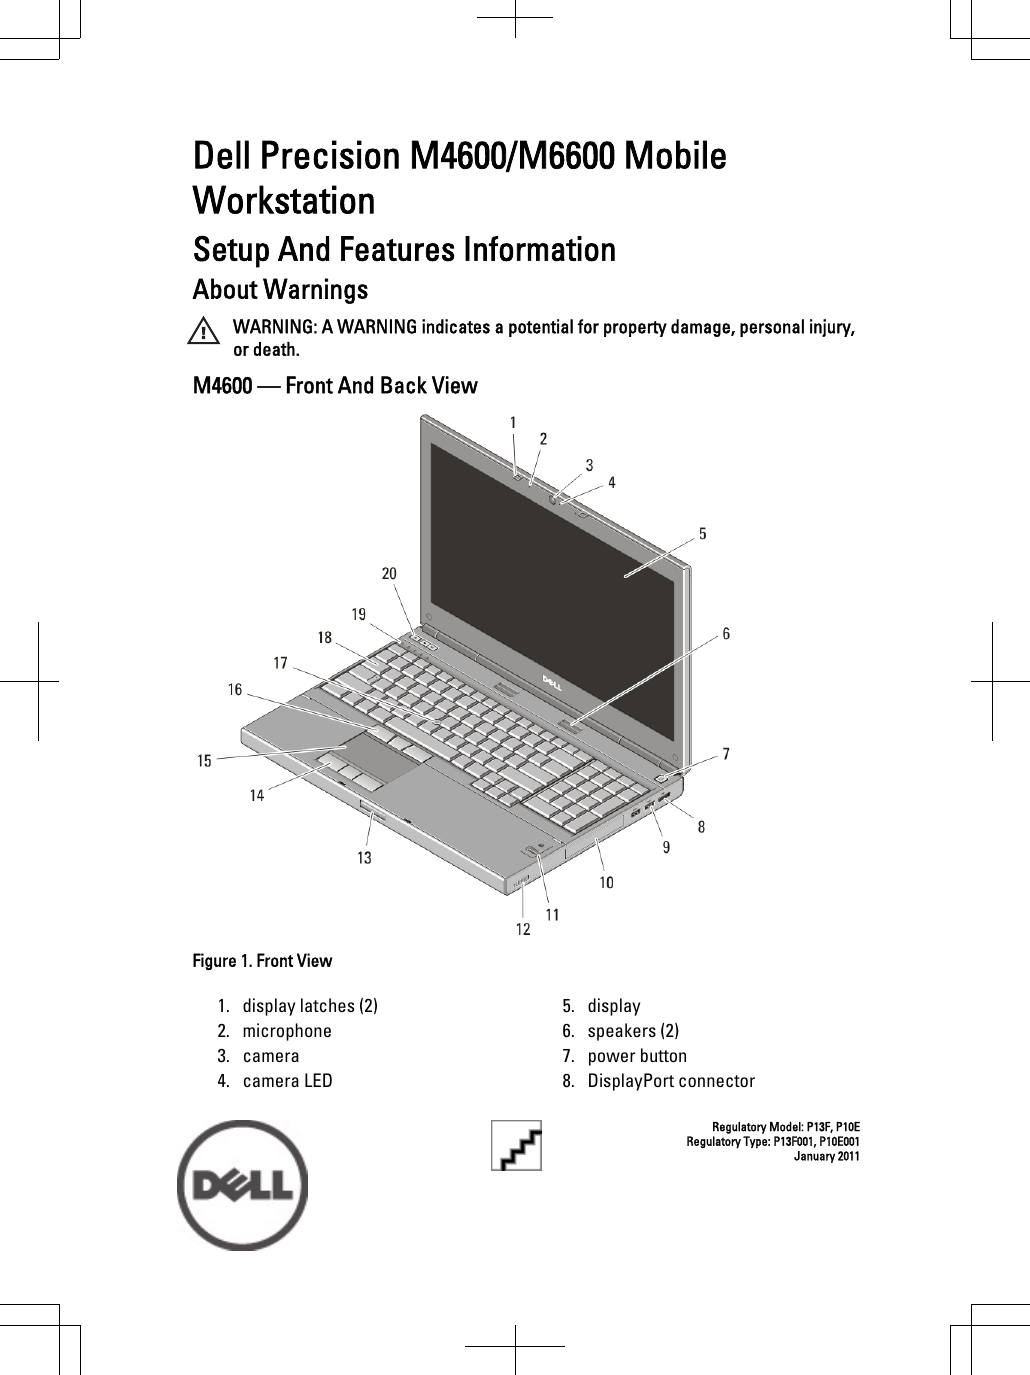 Dell Precision M4600/M6600 MobileWorkstationSetup And Features InformationAbout WarningsWARNING: A WARNING indicates a potential for property damage, personal injury,or death.M4600 — Front And Back ViewFigure 1. Front View1. display latches (2)2. microphone3. camera4. camera LED5. display6. speakers (2)7. power button8. DisplayPort connectorRegulatory Model: P13F, P10ERegulatory Type: P13F001, P10E001January 2011